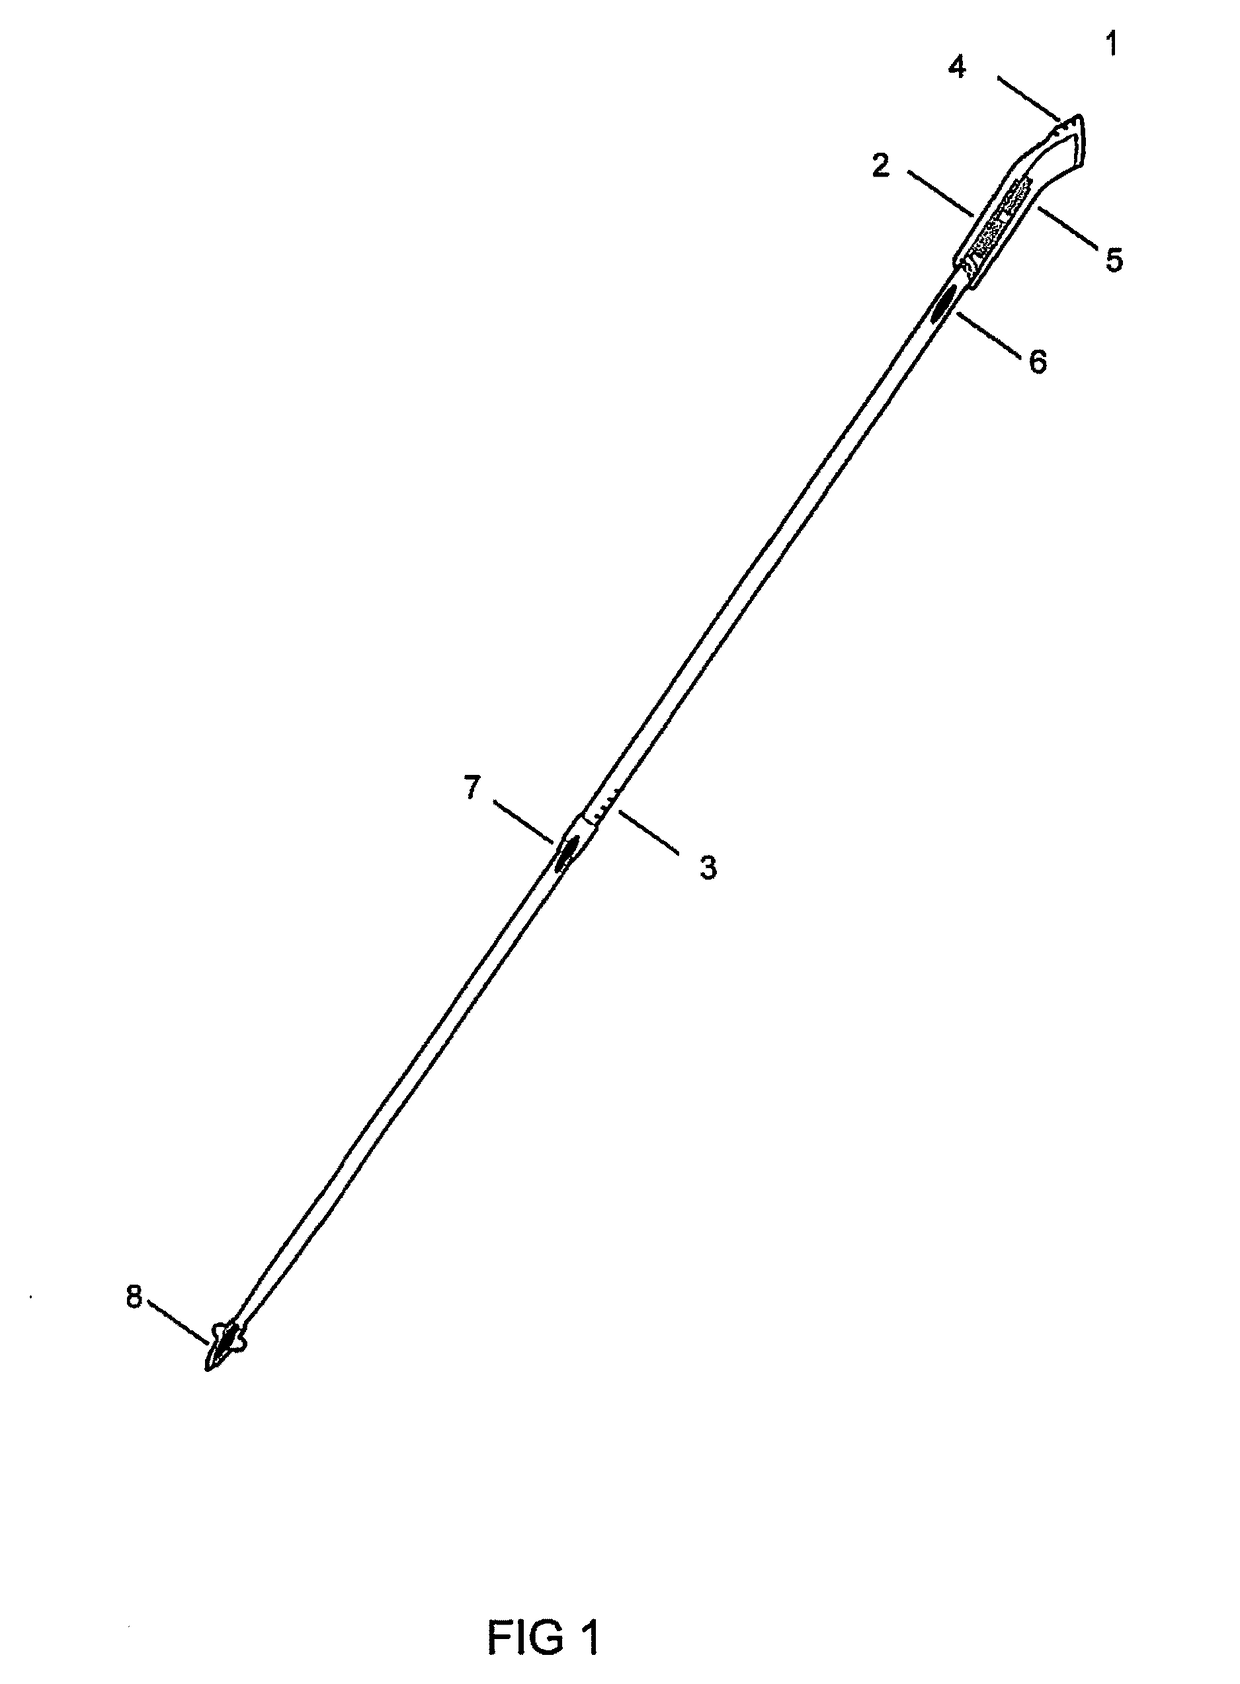 Sport pole with sensors and a method for using it